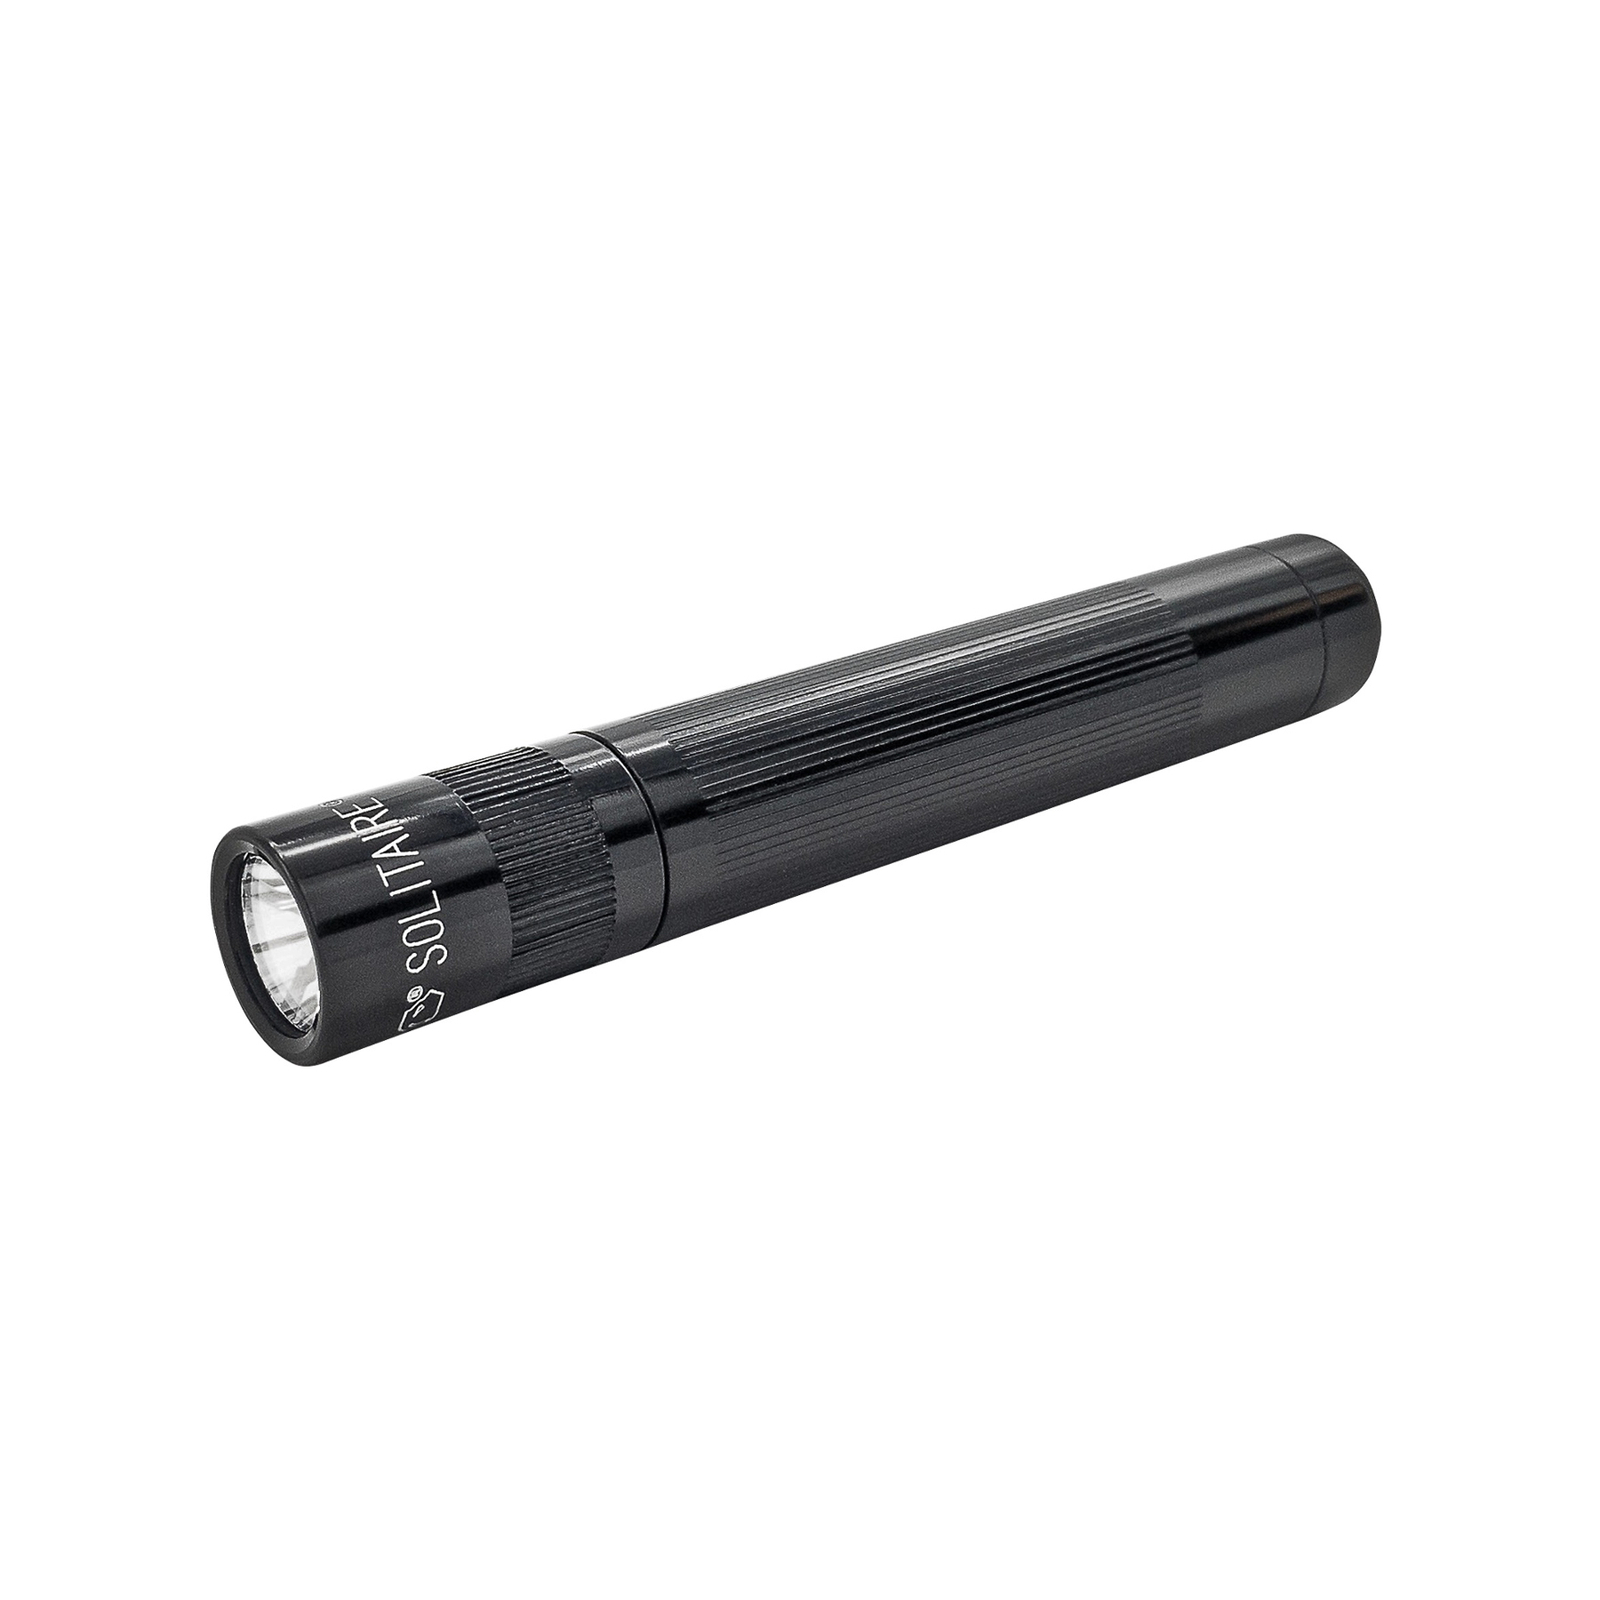 Maglite Xenon lommelygte Solitaire 1-celle AAA sort